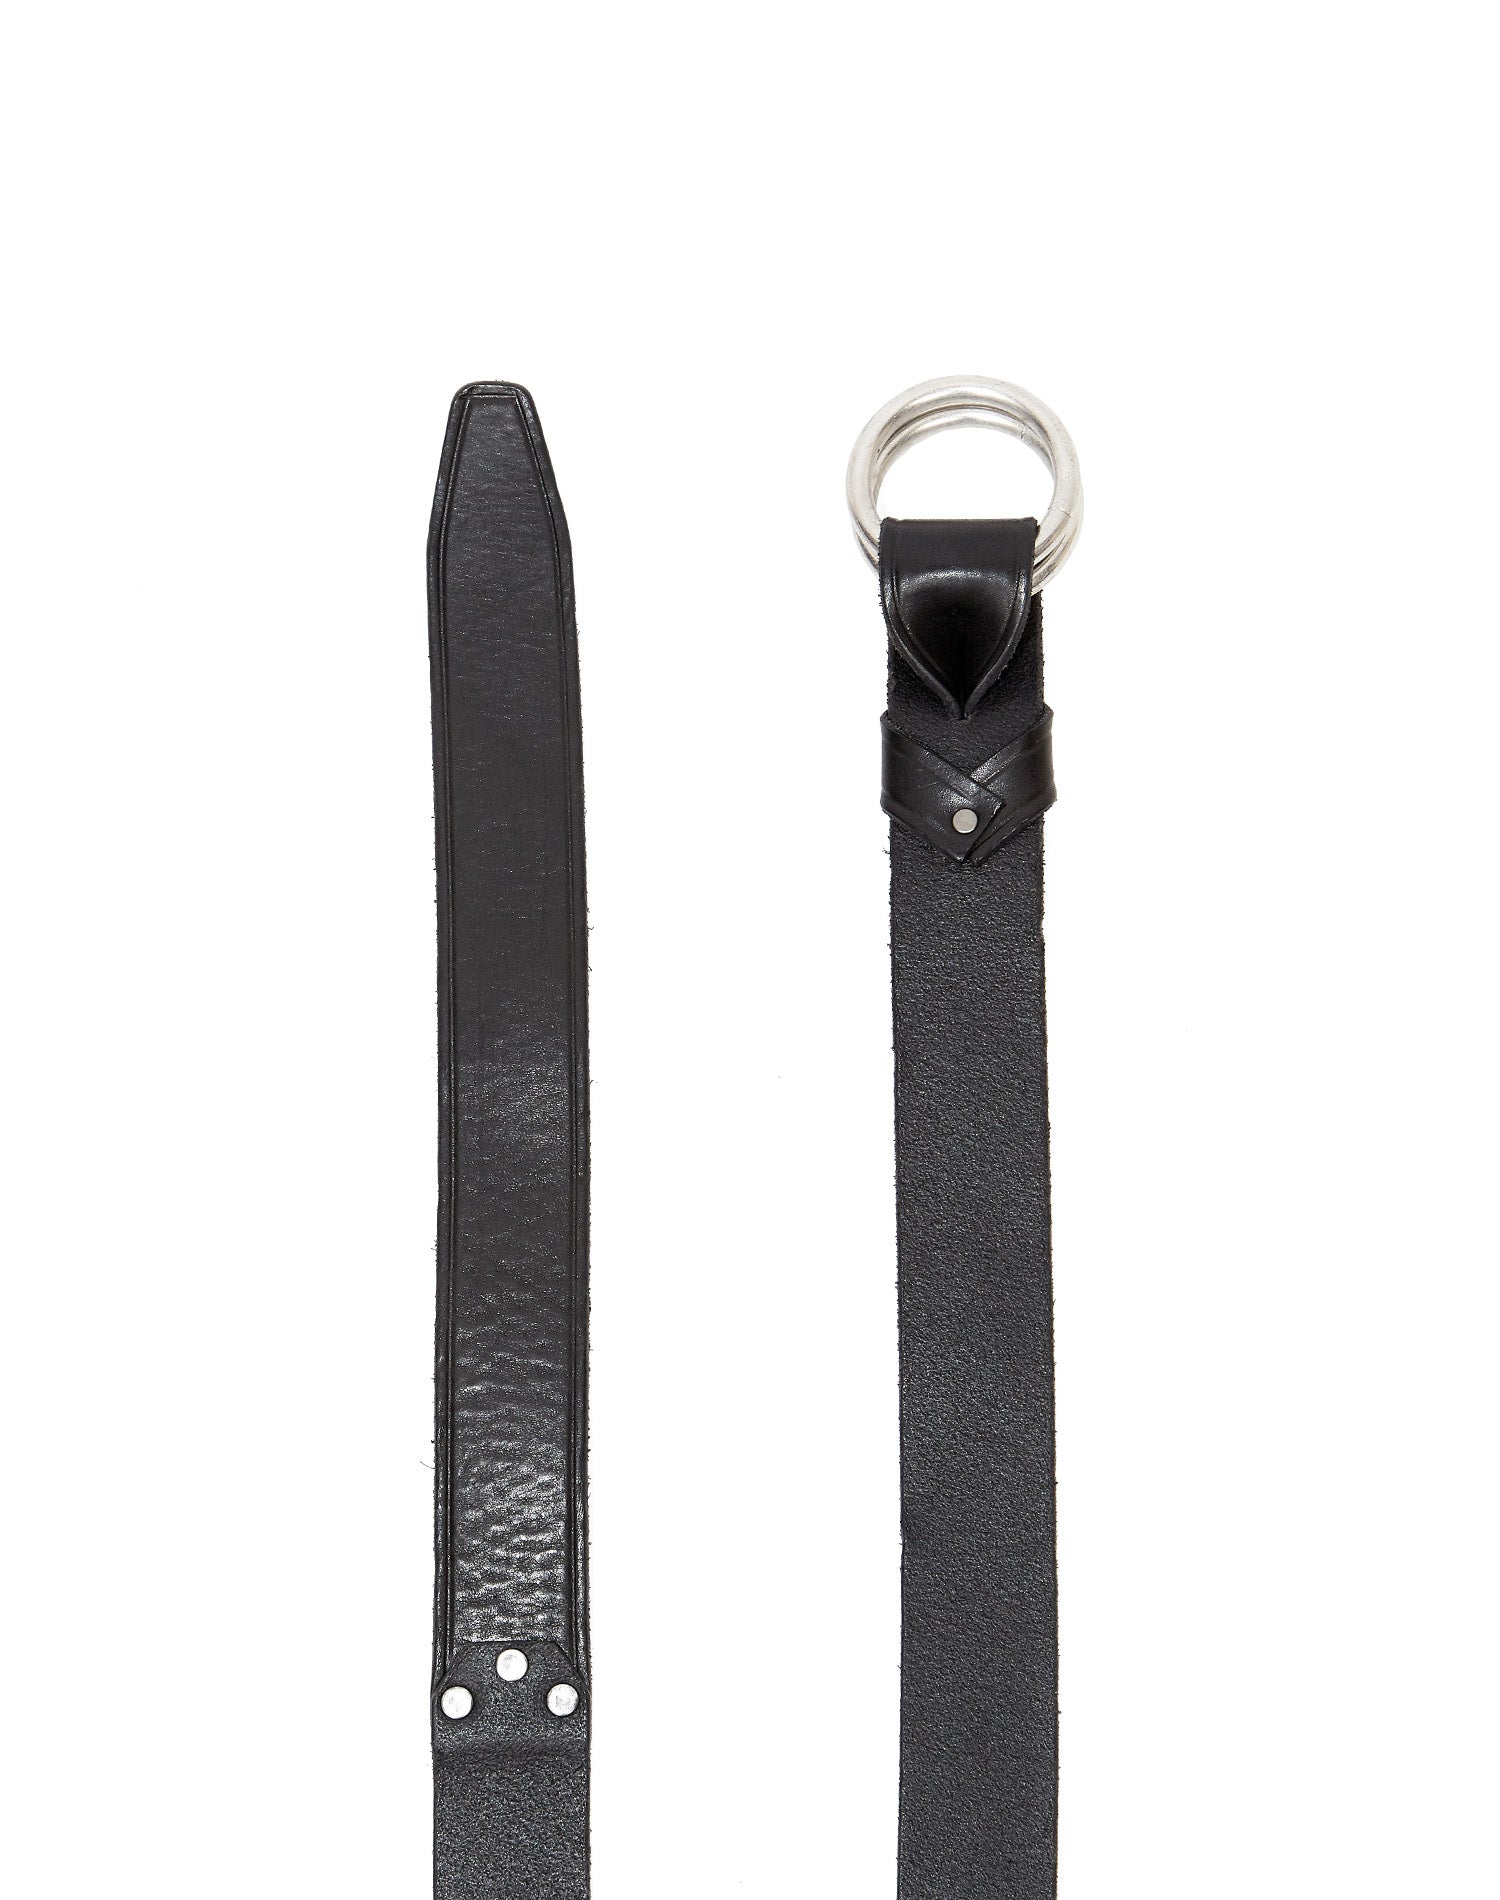 MARK BELT Black leather belt with ring buckle. Height: 3.5 cm. Made in Italy. HTC LOS ANGELES